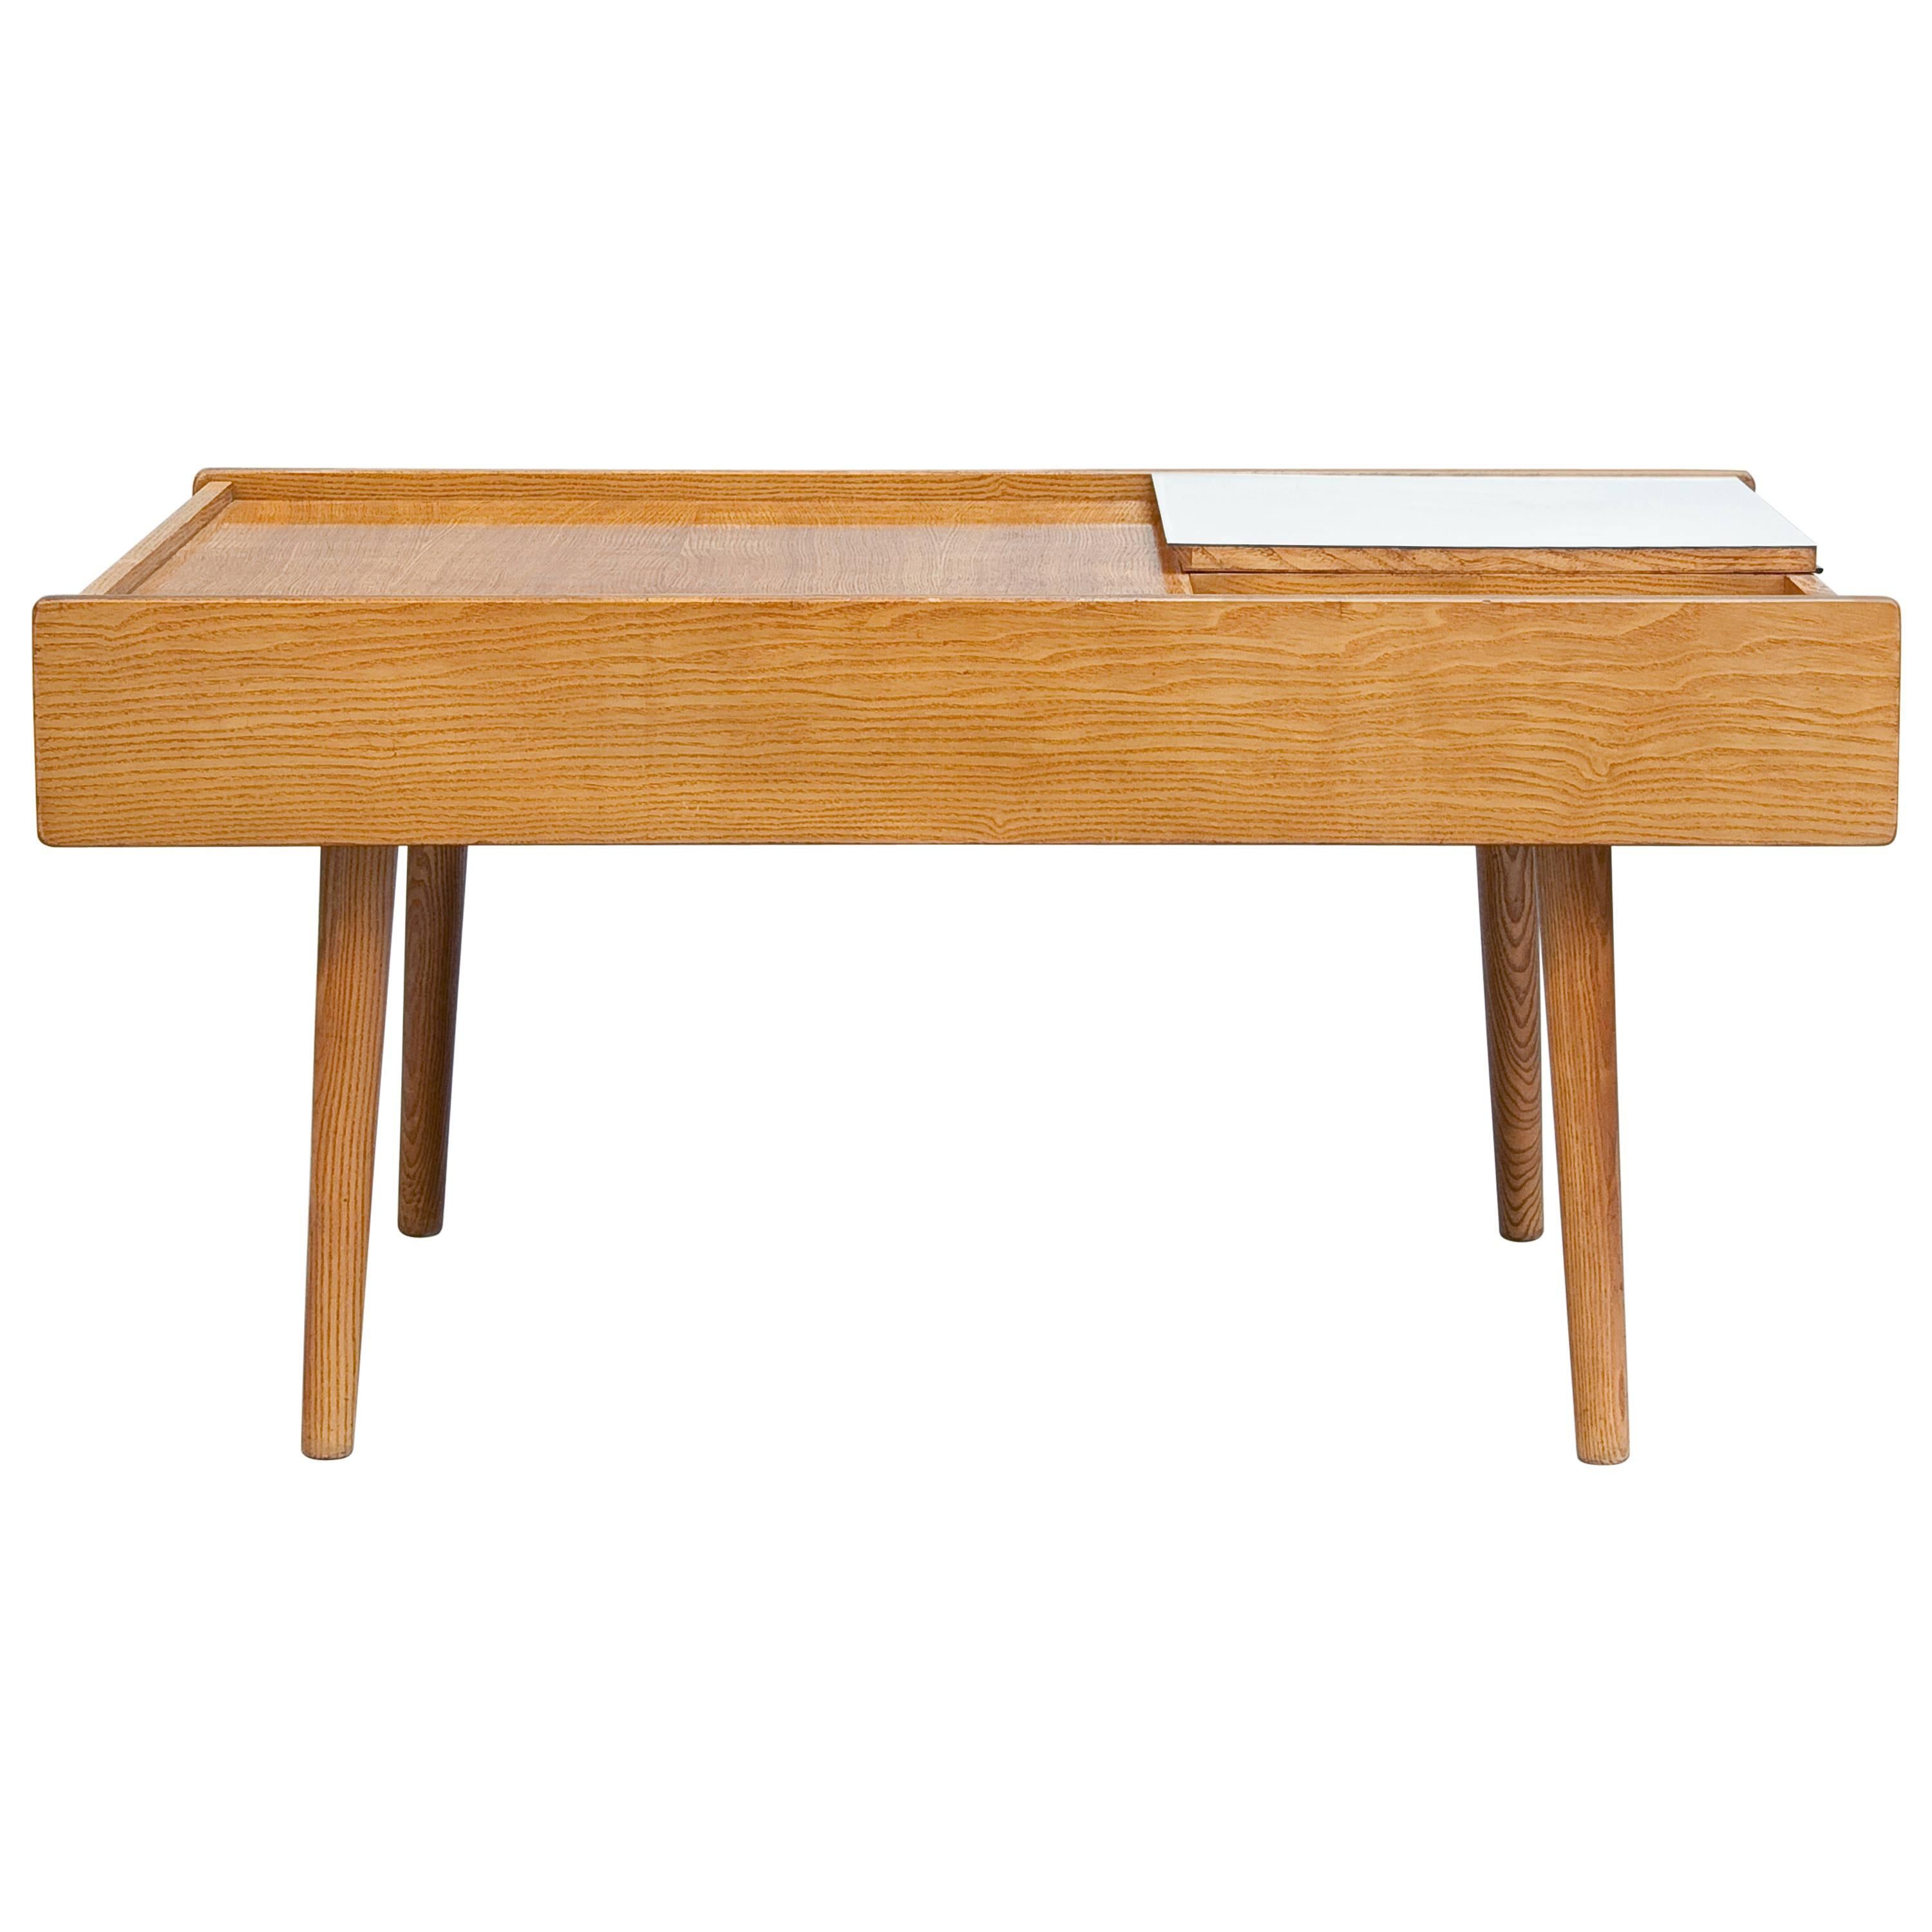 Low Table 119 by Pierre Paulin, Meubles TV Edition, 1953